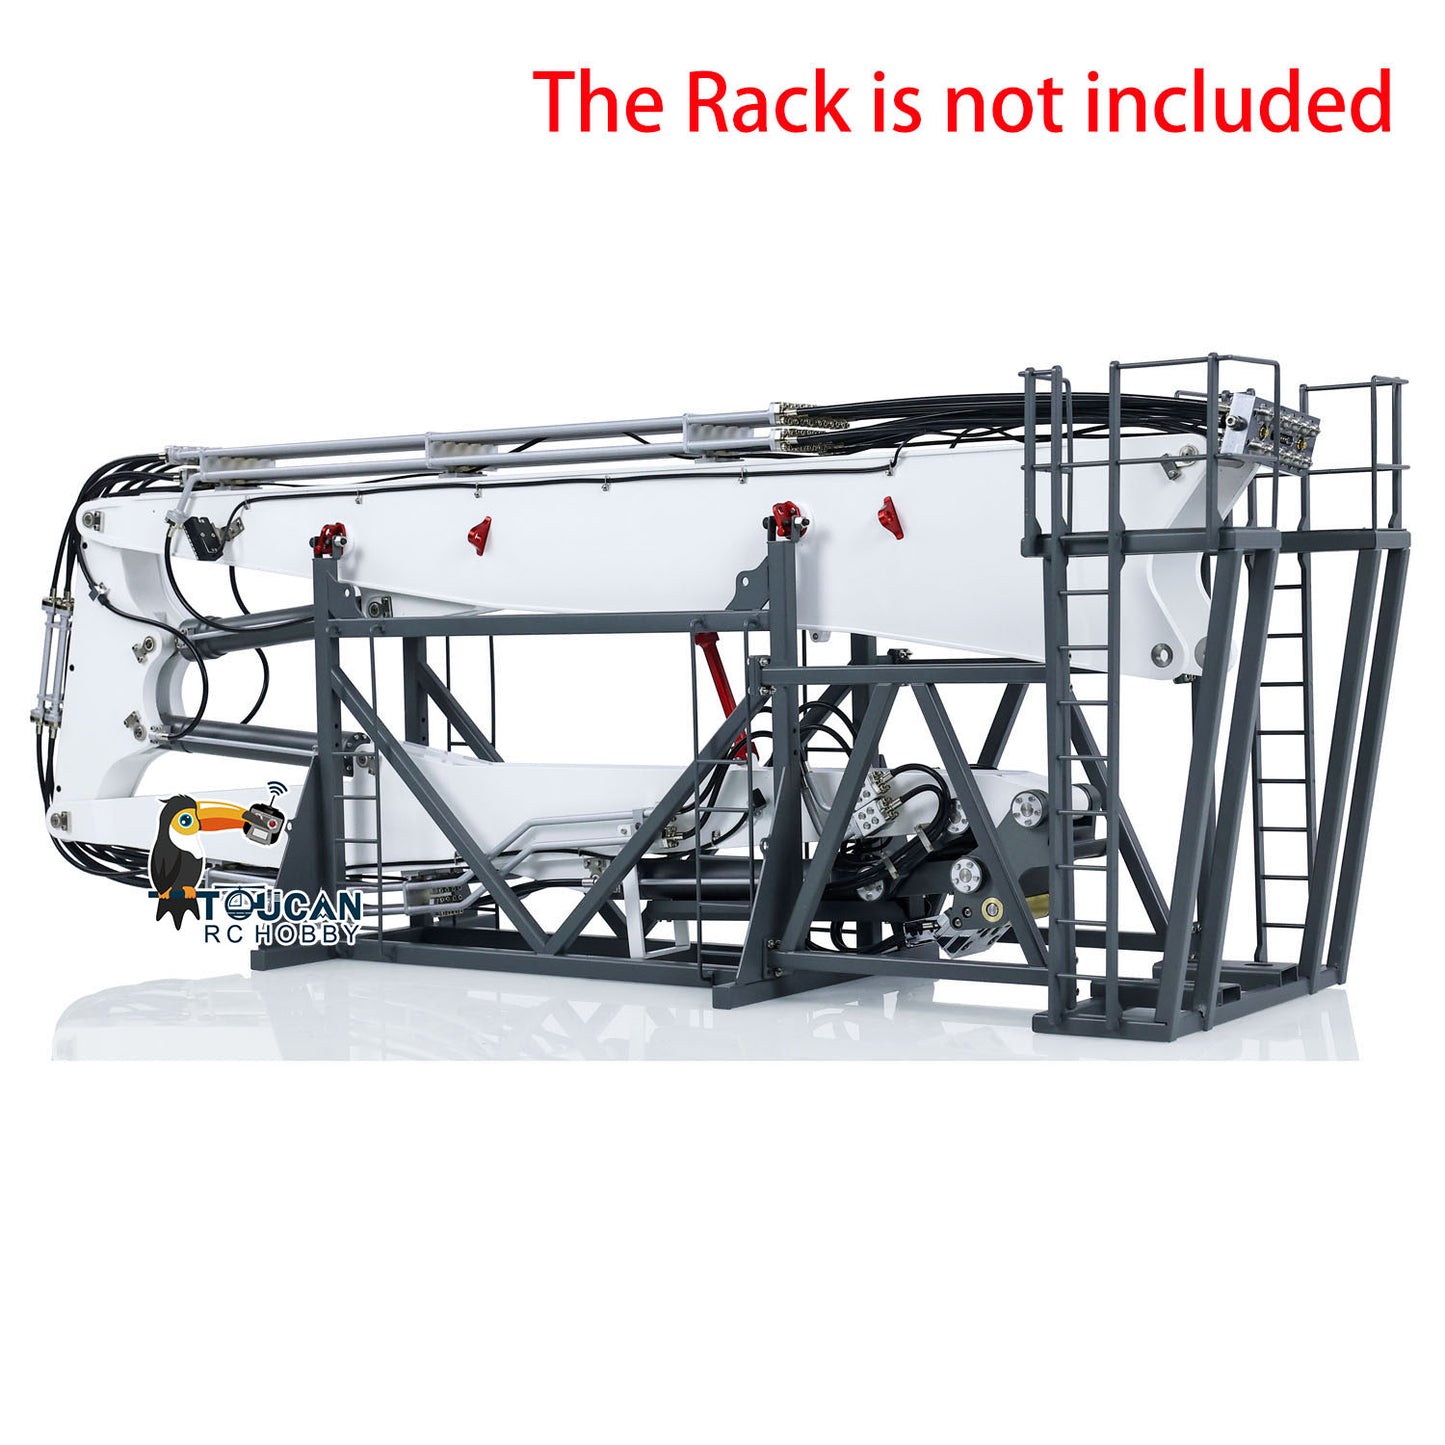 IN STOCK Metal Demolition Arm Rack for CUT CUT K970-300 RC Hydraulic Excavator Radio Controlled Diggers Hobby Model DIY Parts